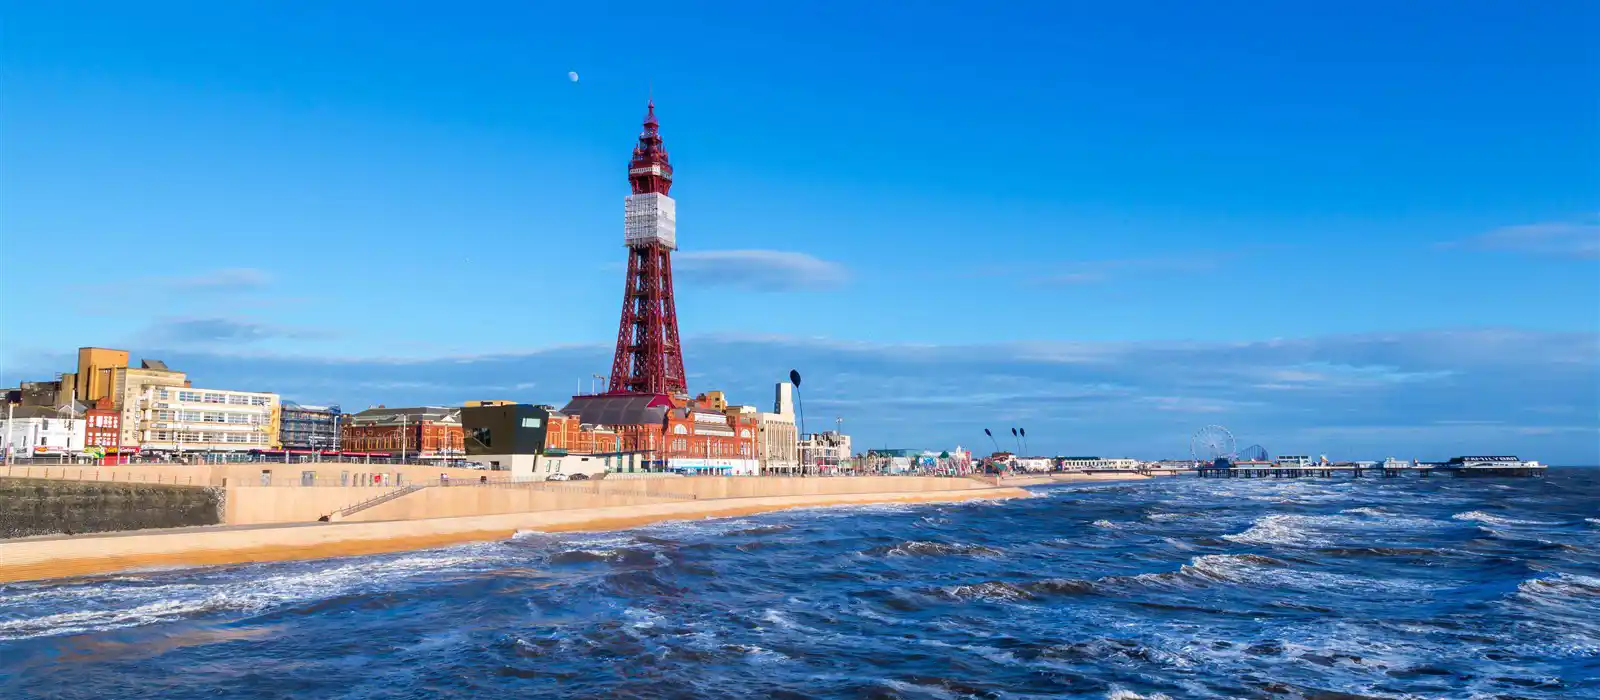 Blackpool Tower in Lancashire